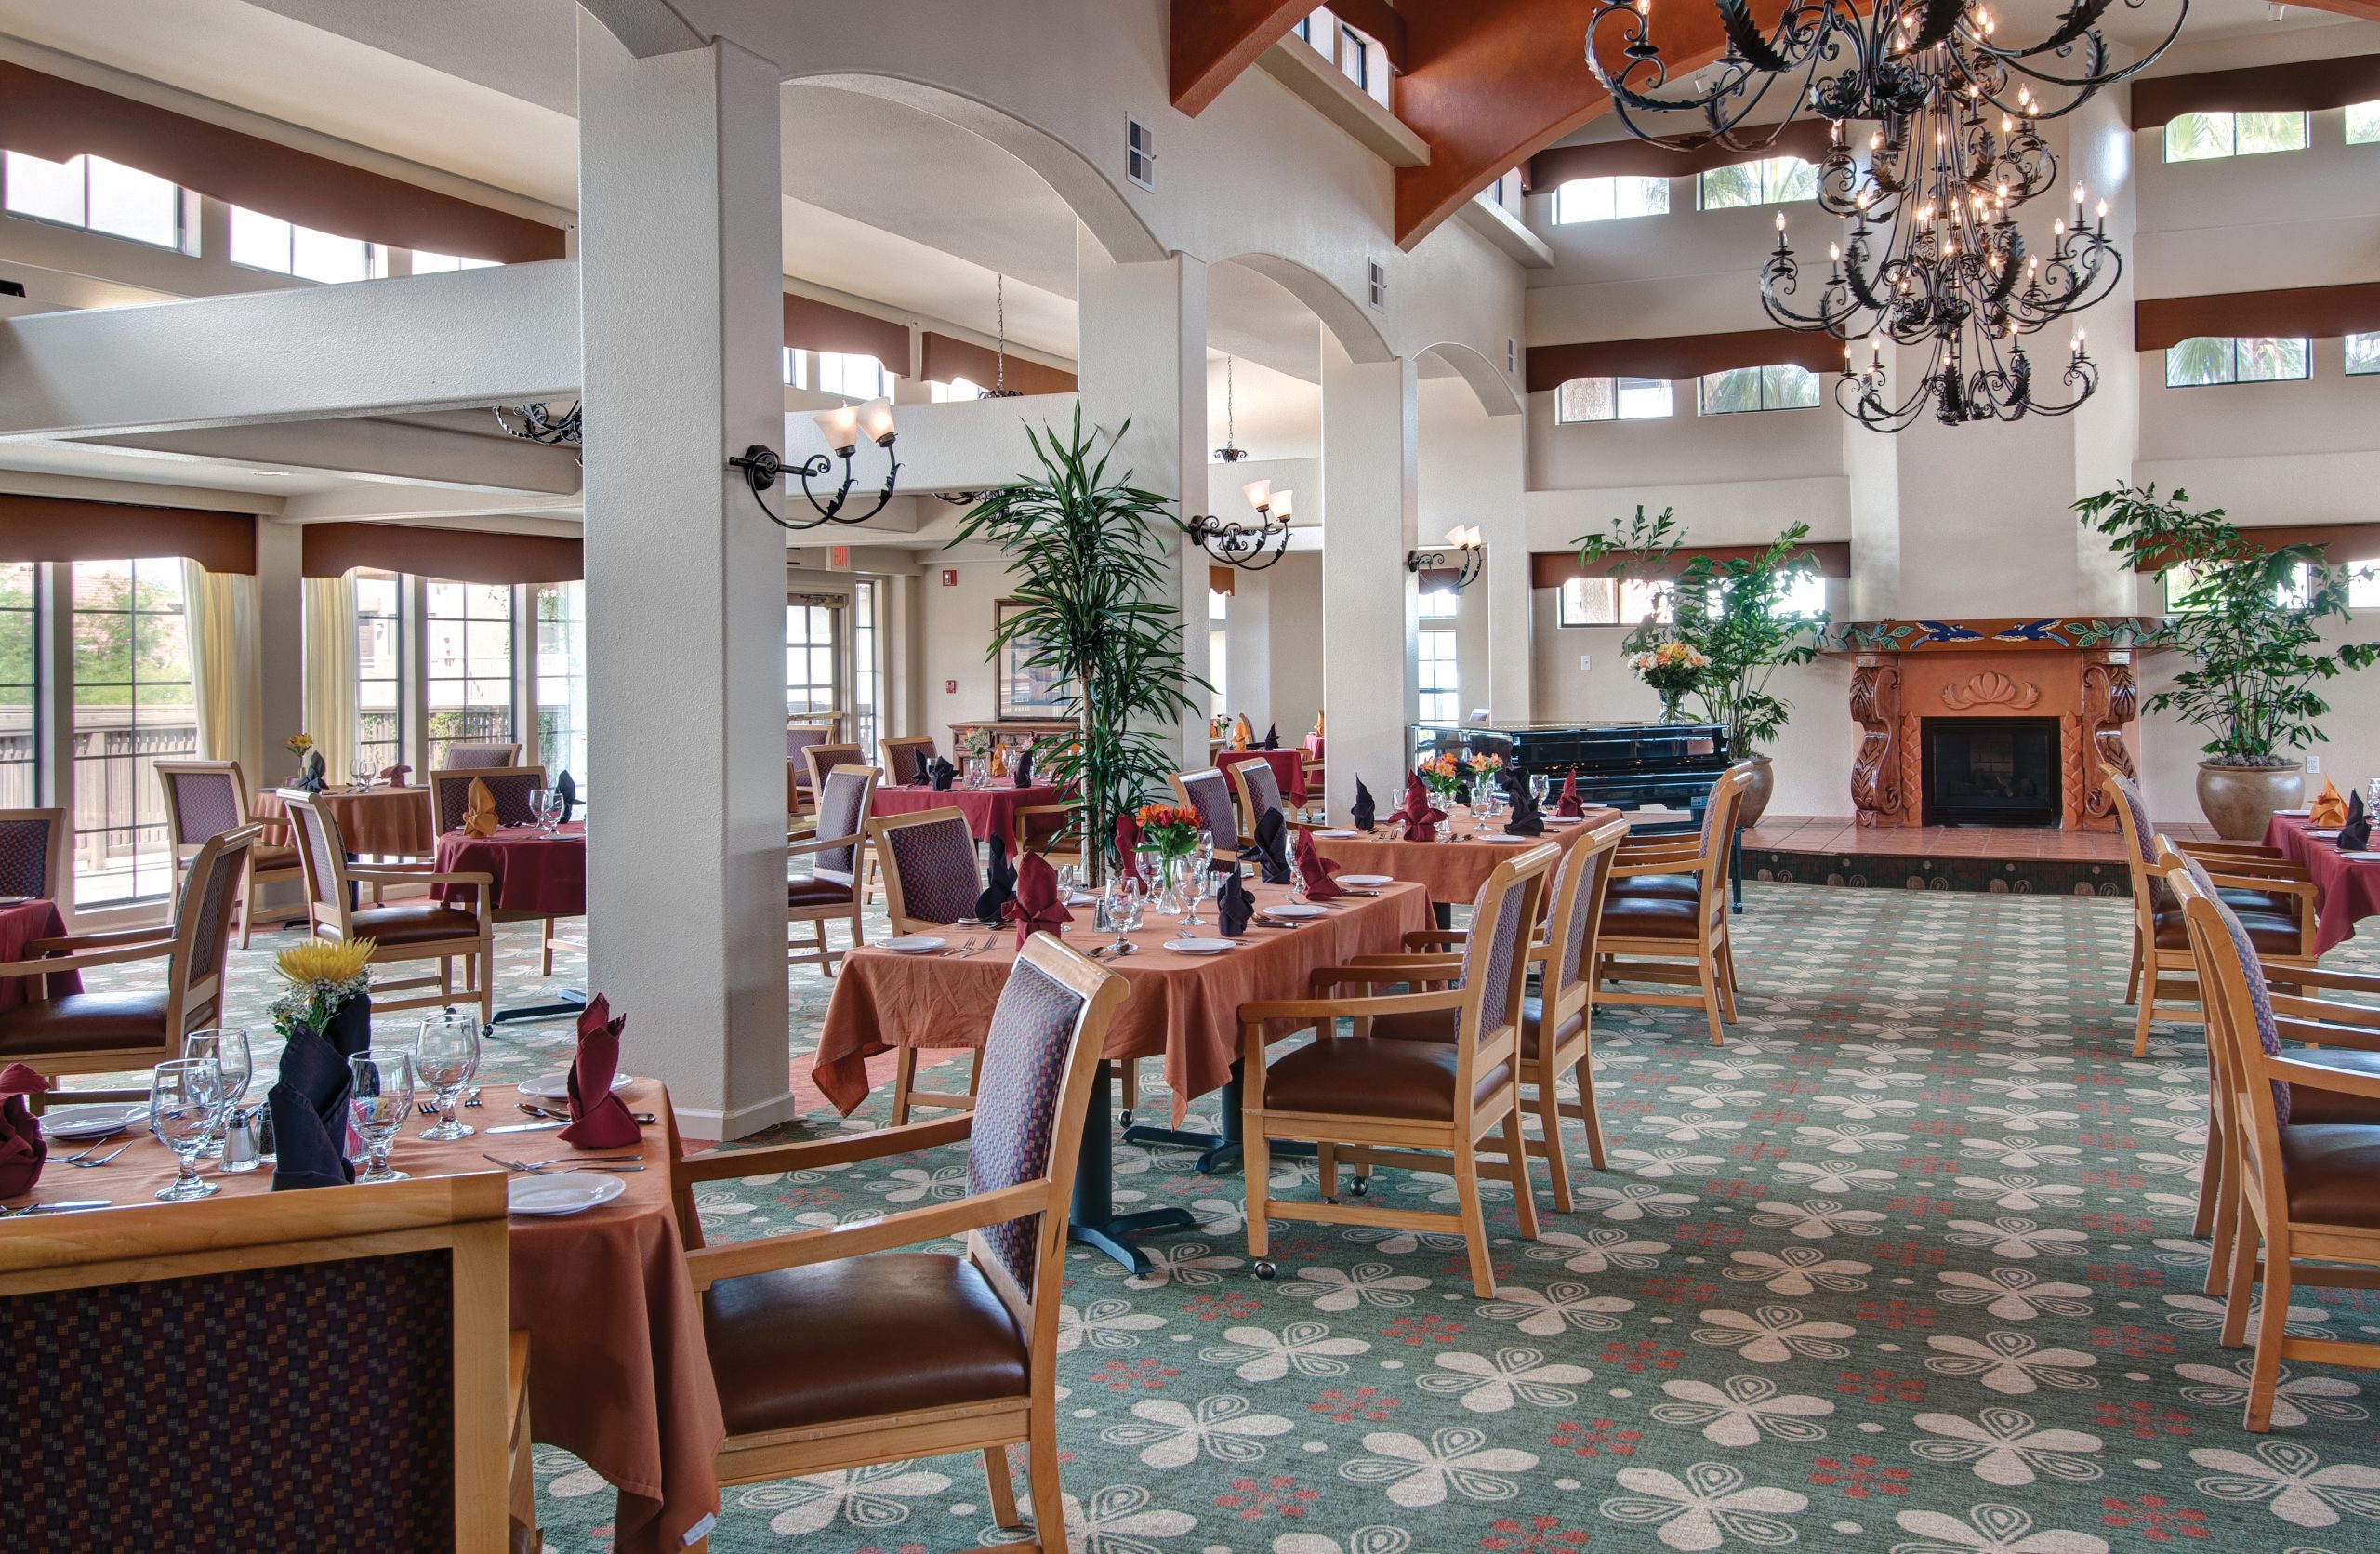 warm and cozy dining room at a retirement community